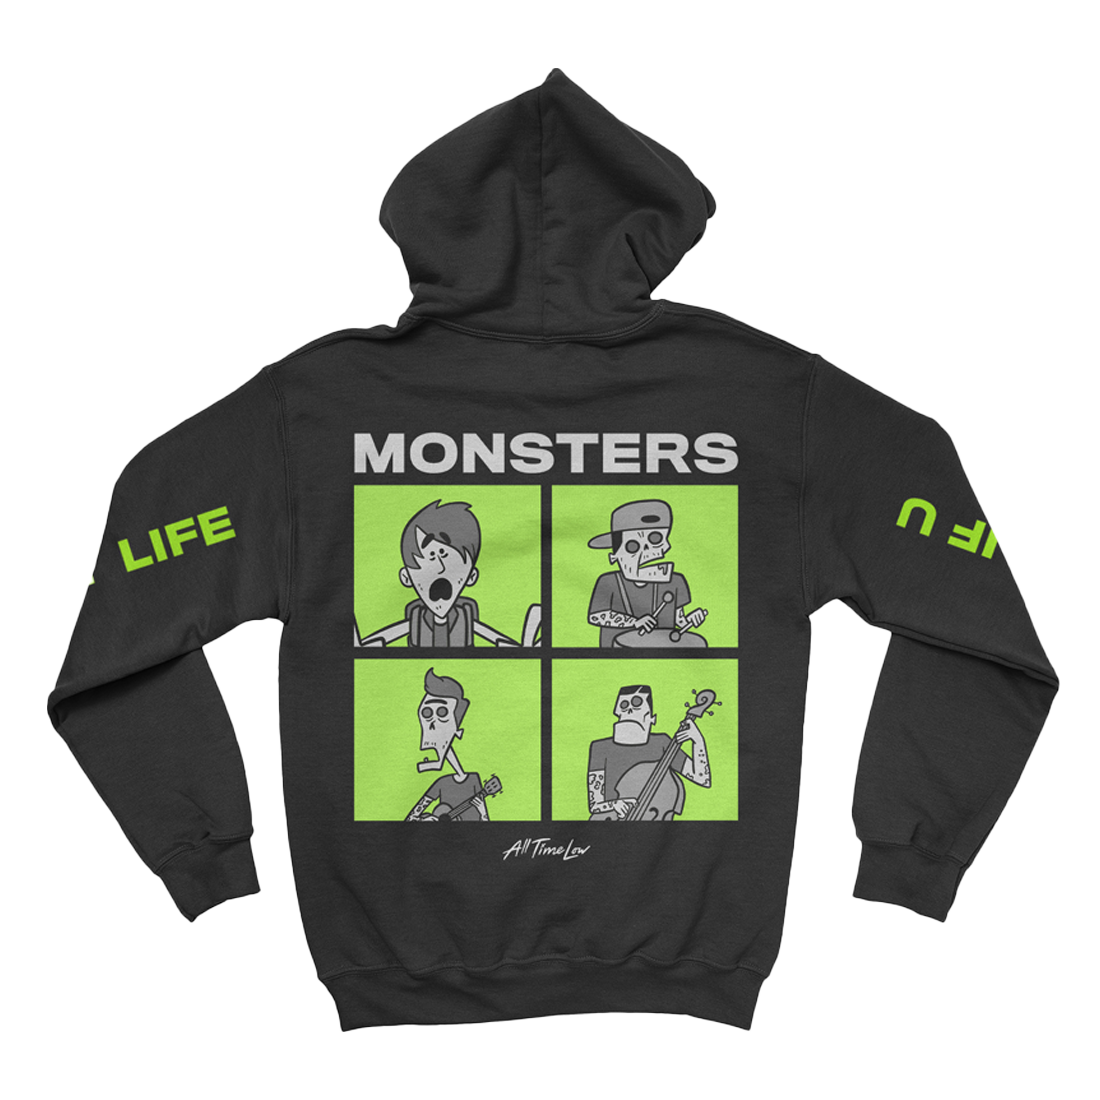 The Monsters Collection